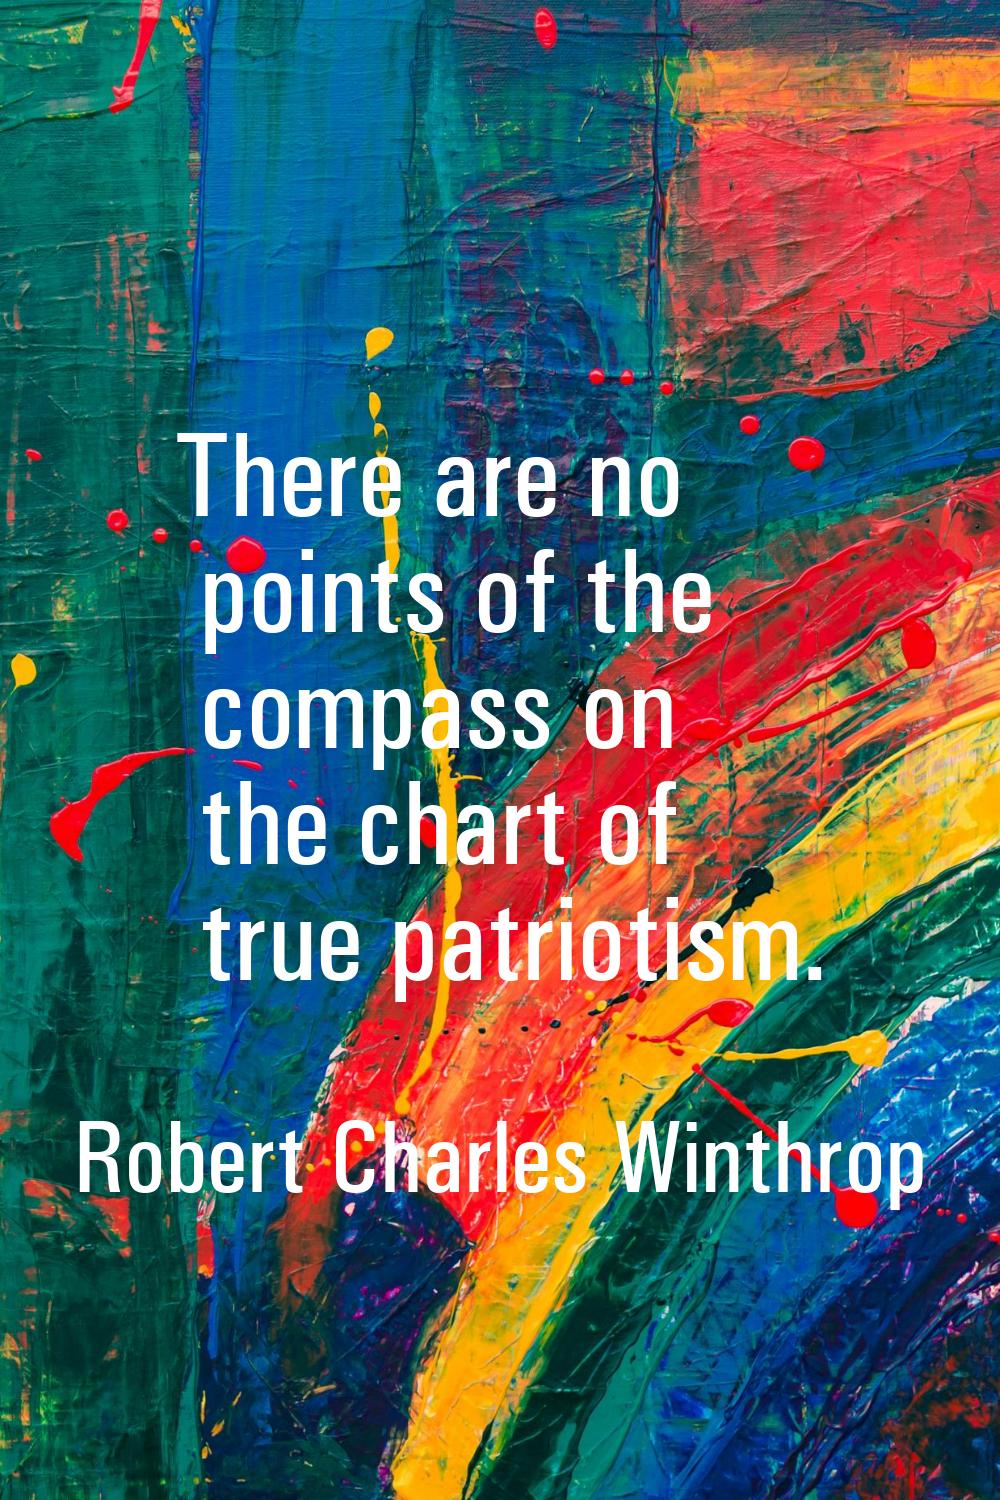 There are no points of the compass on the chart of true patriotism.